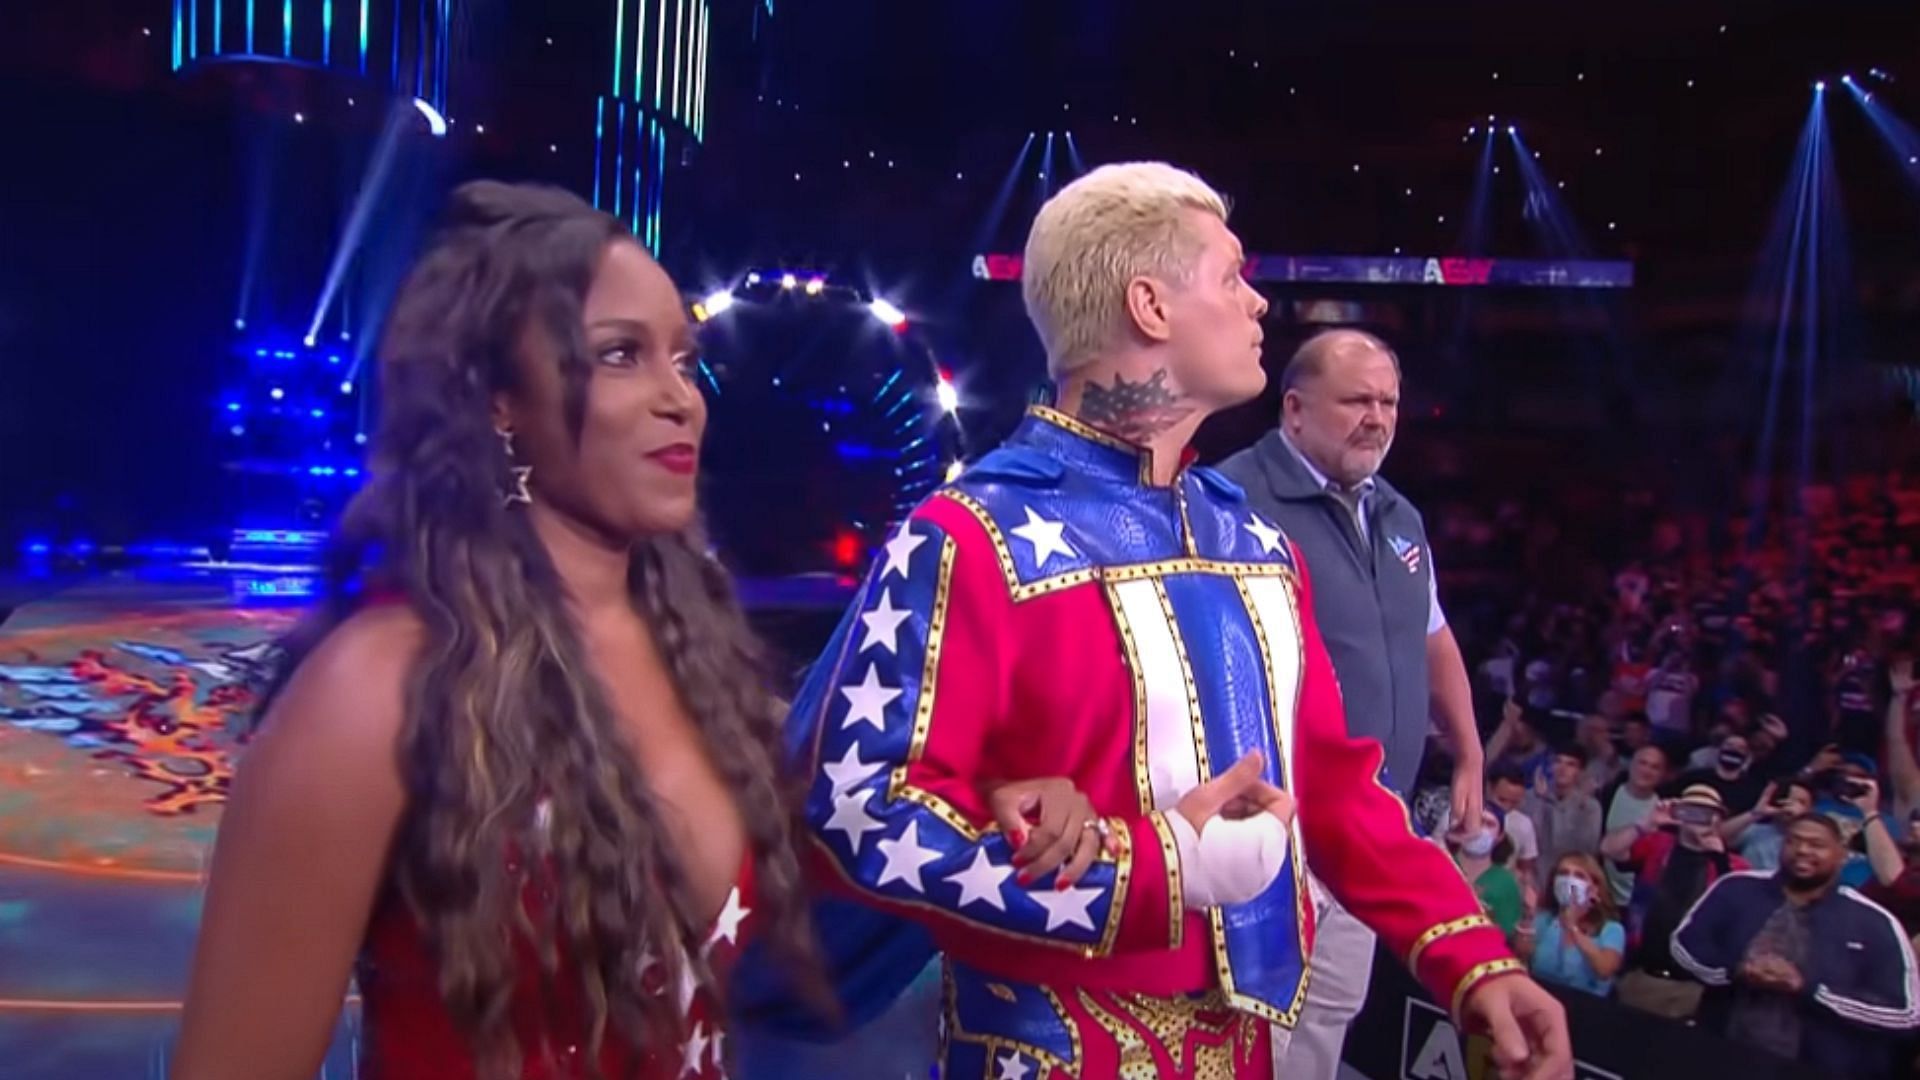 Cody Rhodes and Brandi Rhodes are married in real-life [Photos courtesy of AEW